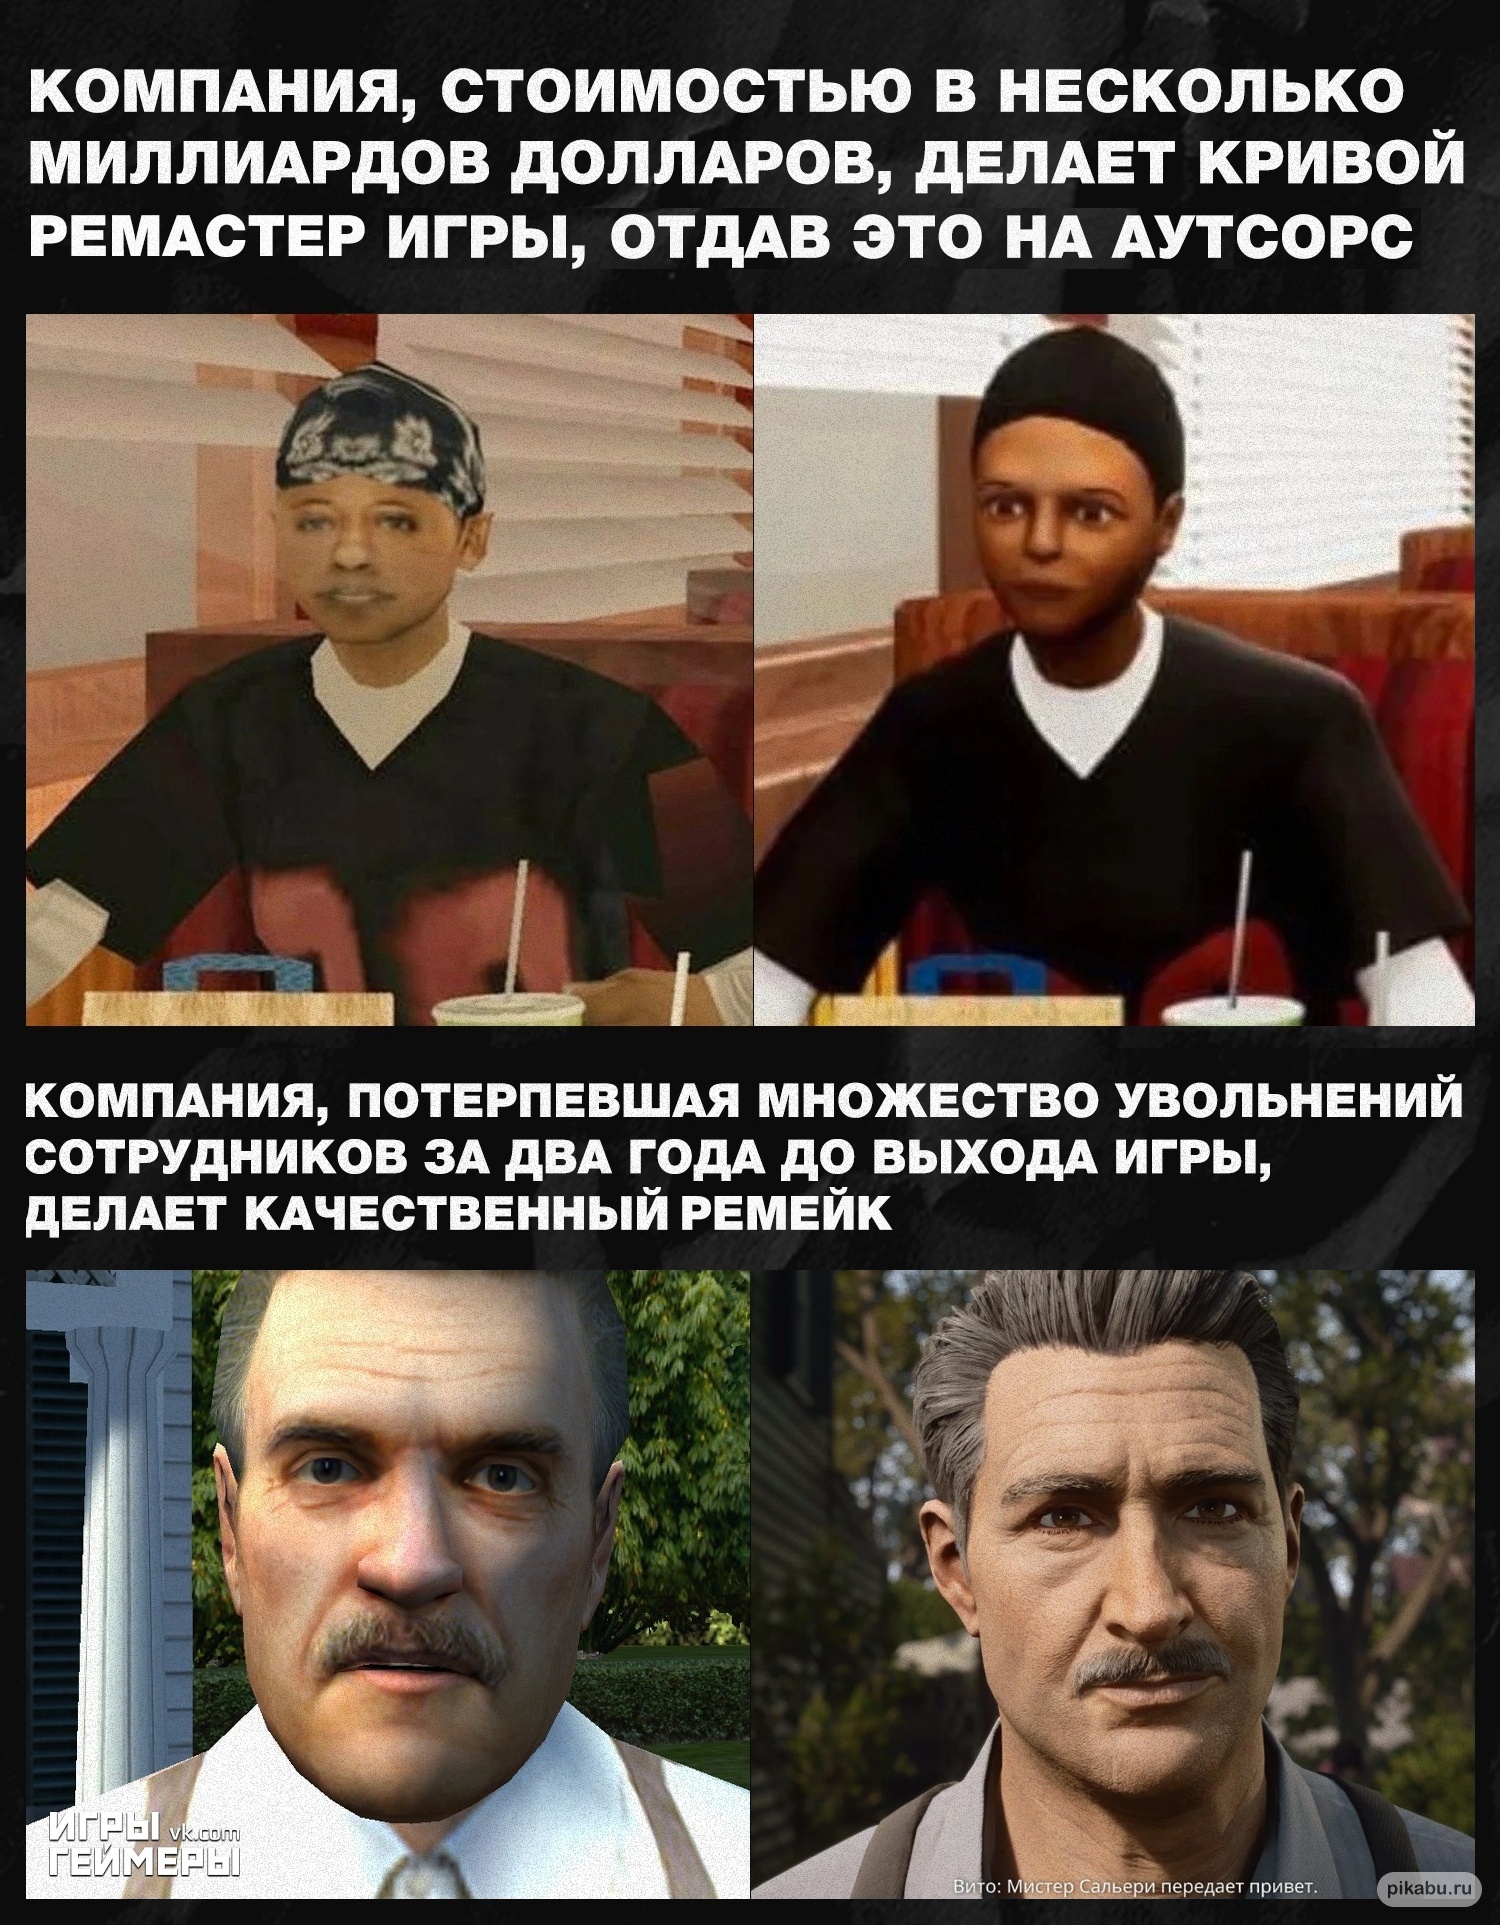 Feel the difference - Games, Gamers, Remaster, Mafia: Definitive Edition, Mafia, Gta, Memes, Picture with text